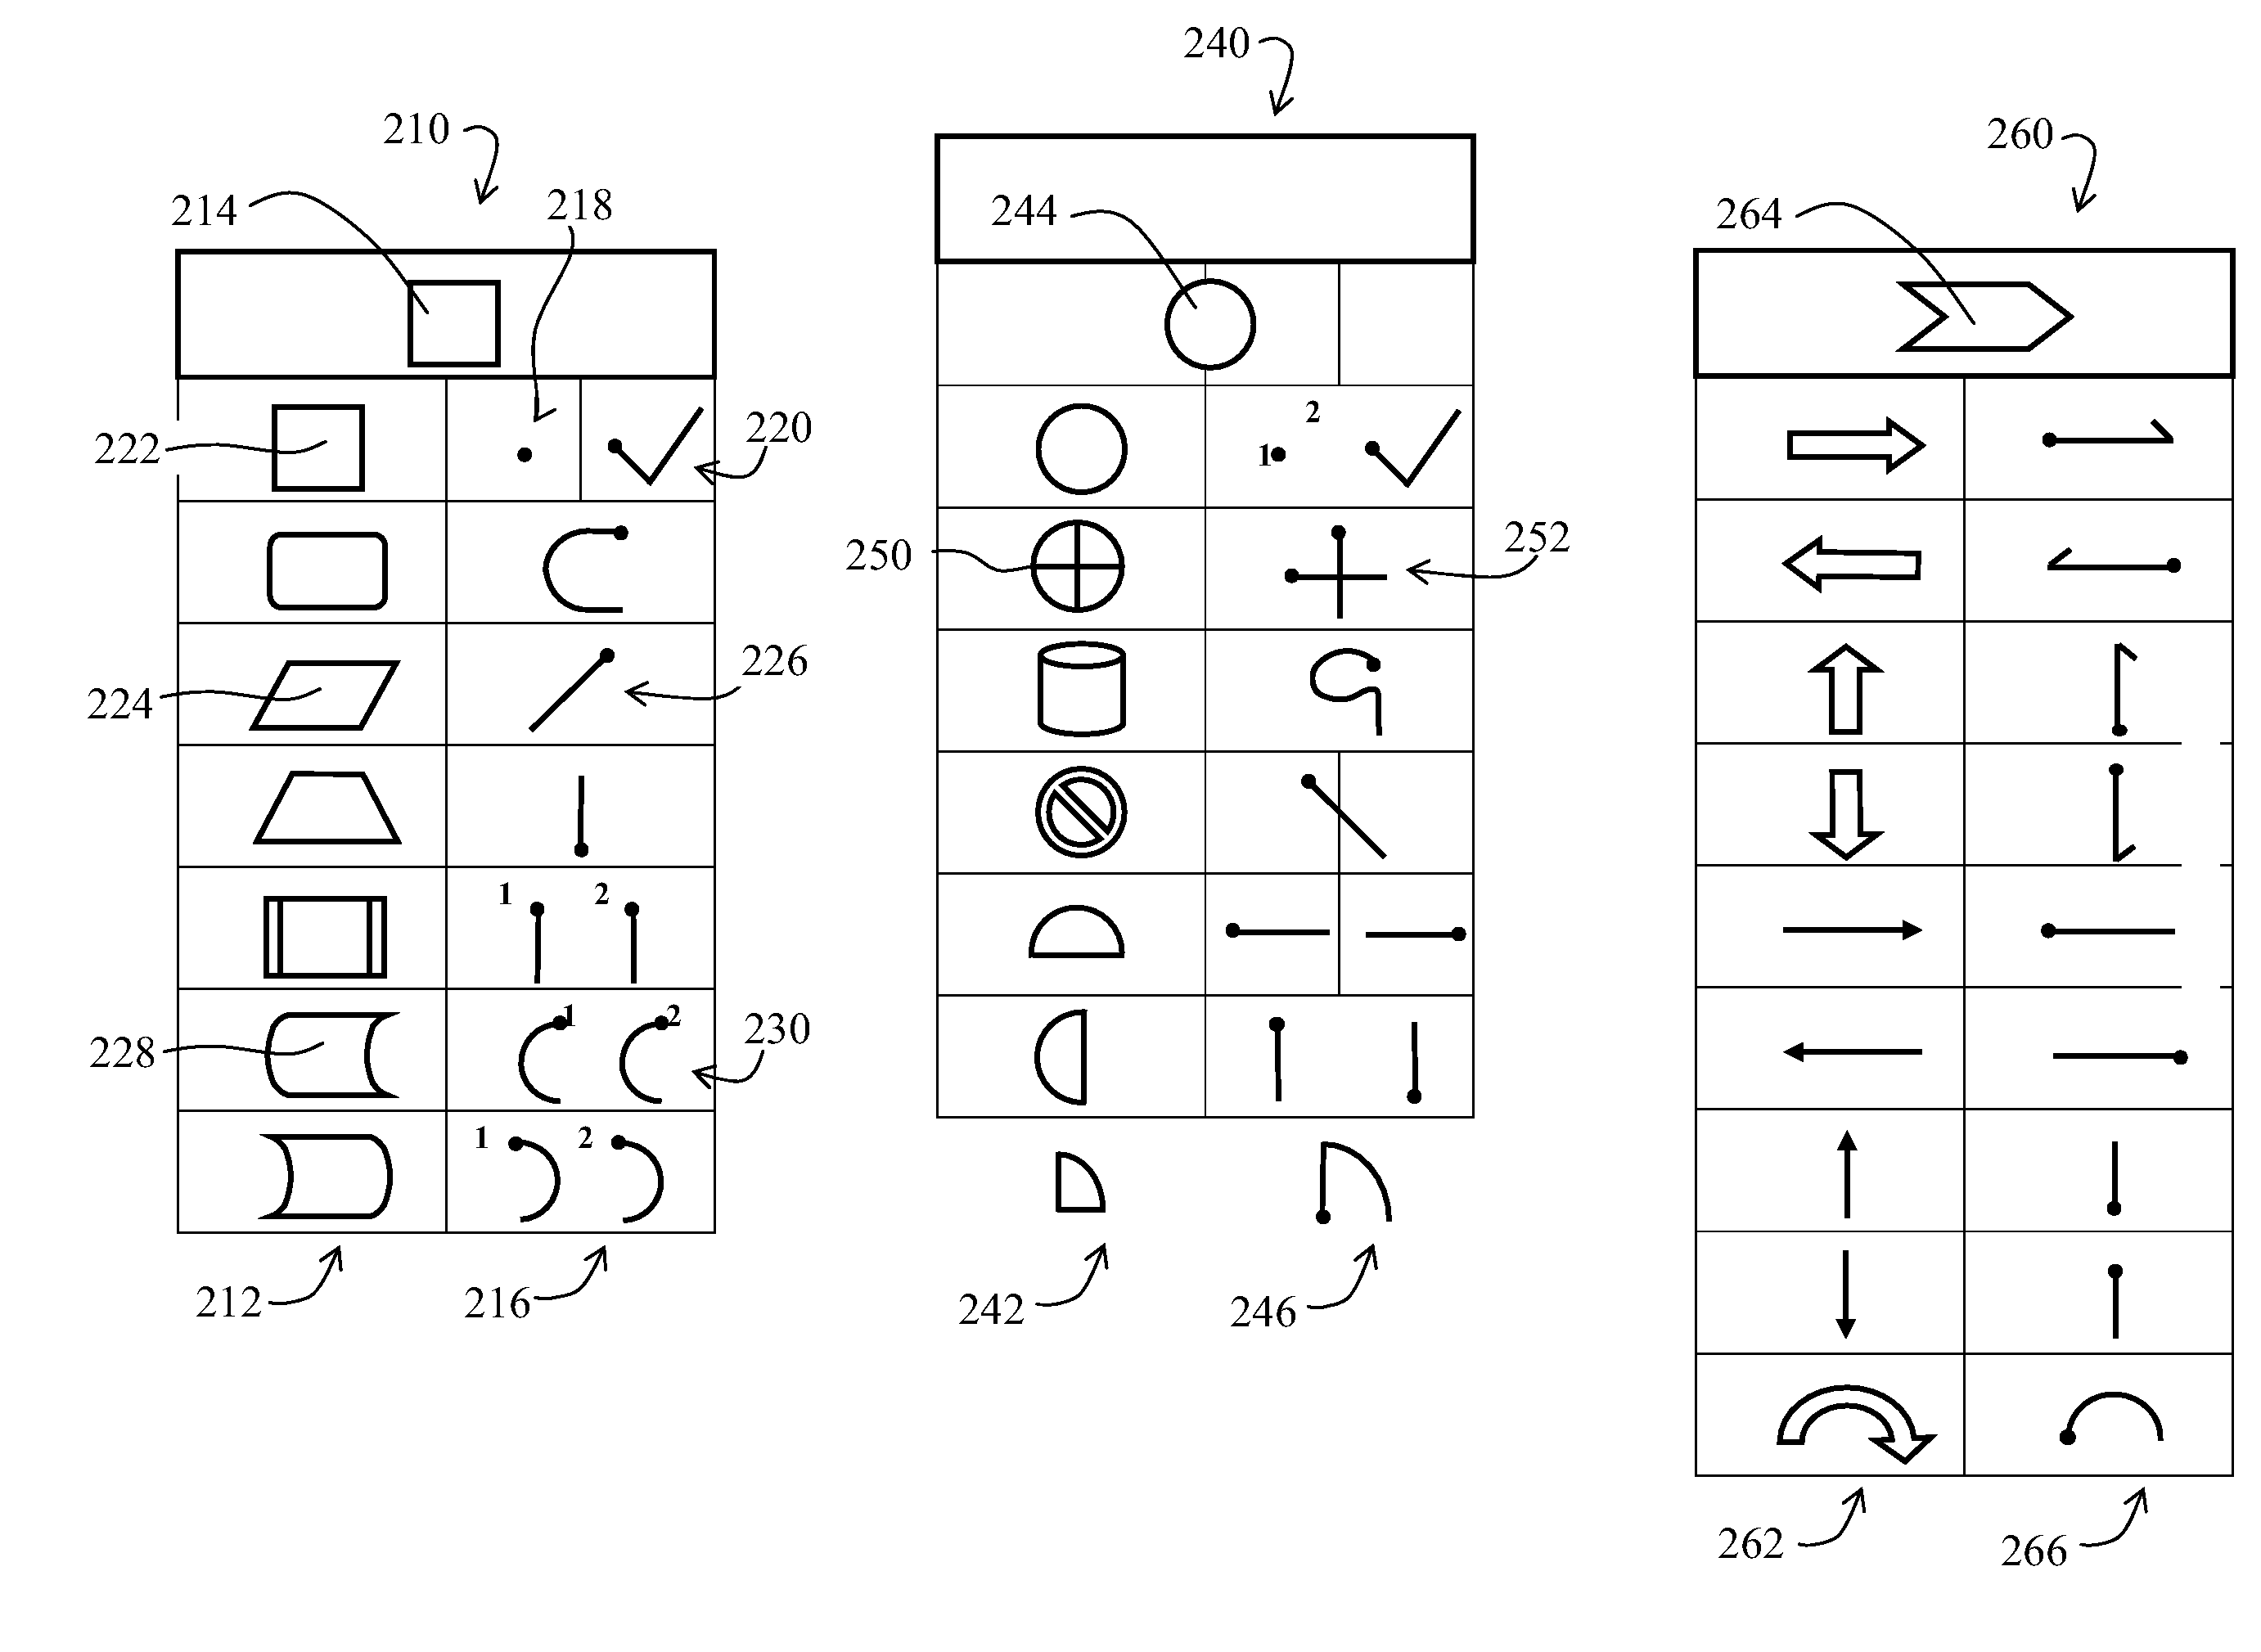 Method, article, apparatus and computer system for inputting a graphical object